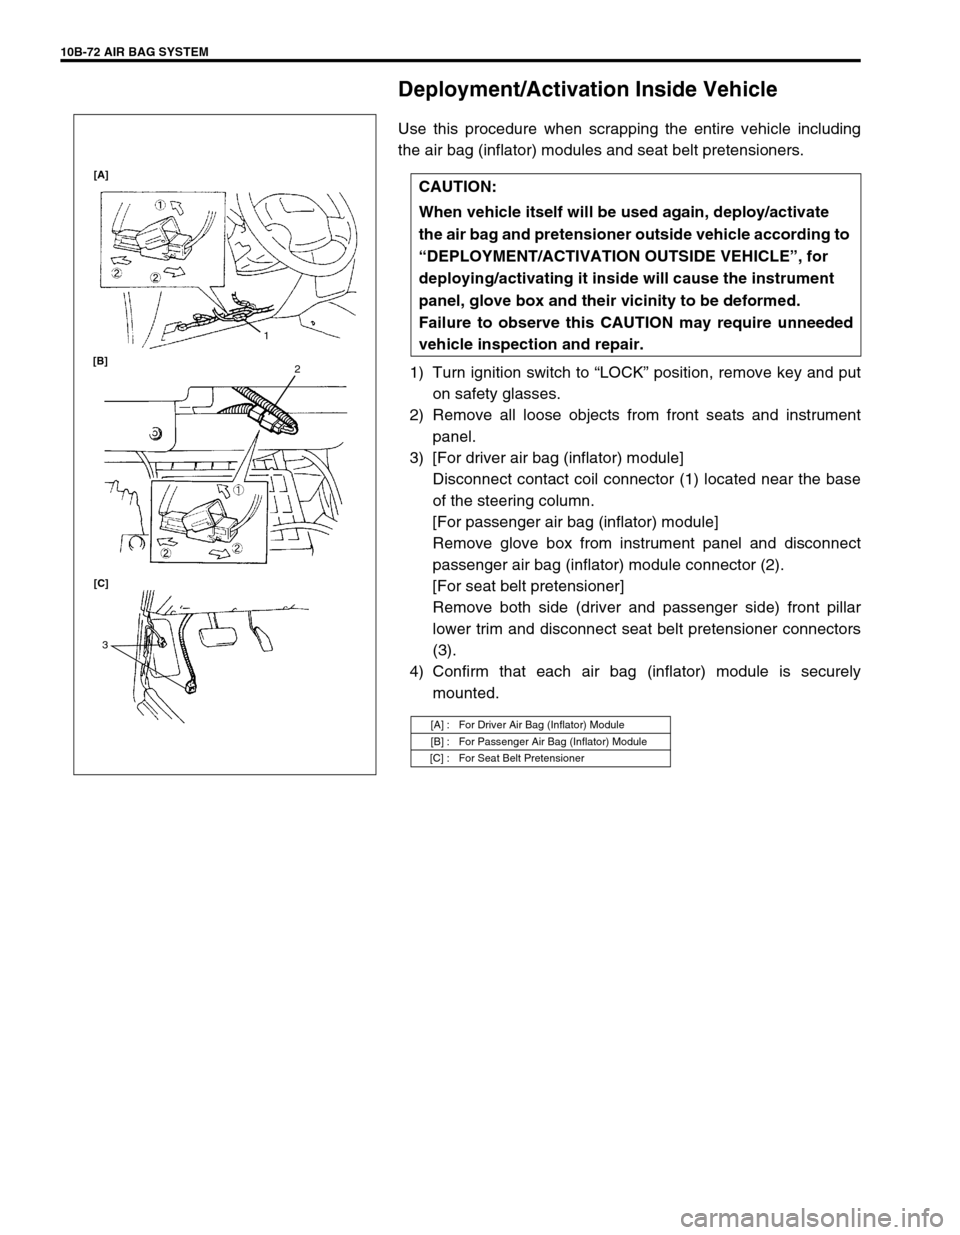 SUZUKI GRAND VITARA 1999 2.G Owners Manual 10B-72 AIR BAG SYSTEM
Deployment/Activation Inside Vehicle
Use this procedure when scrapping the entire vehicle including
the air bag (inflator) modules and seat belt pretensioners.
1) Turn ignition s